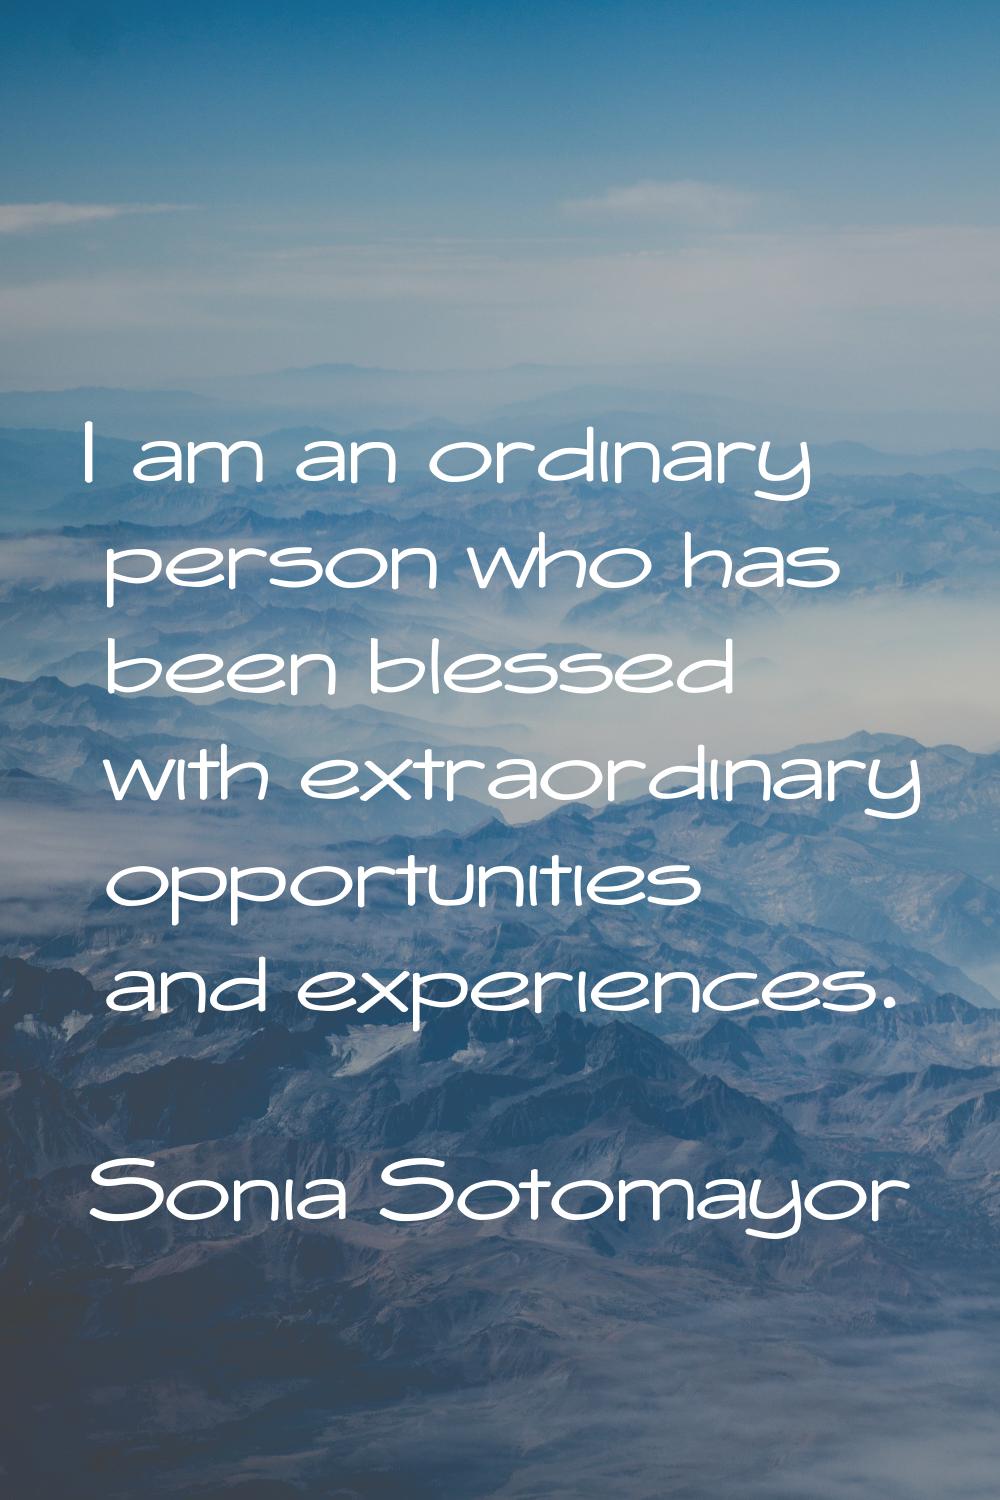 I am an ordinary person who has been blessed with extraordinary opportunities and experiences.